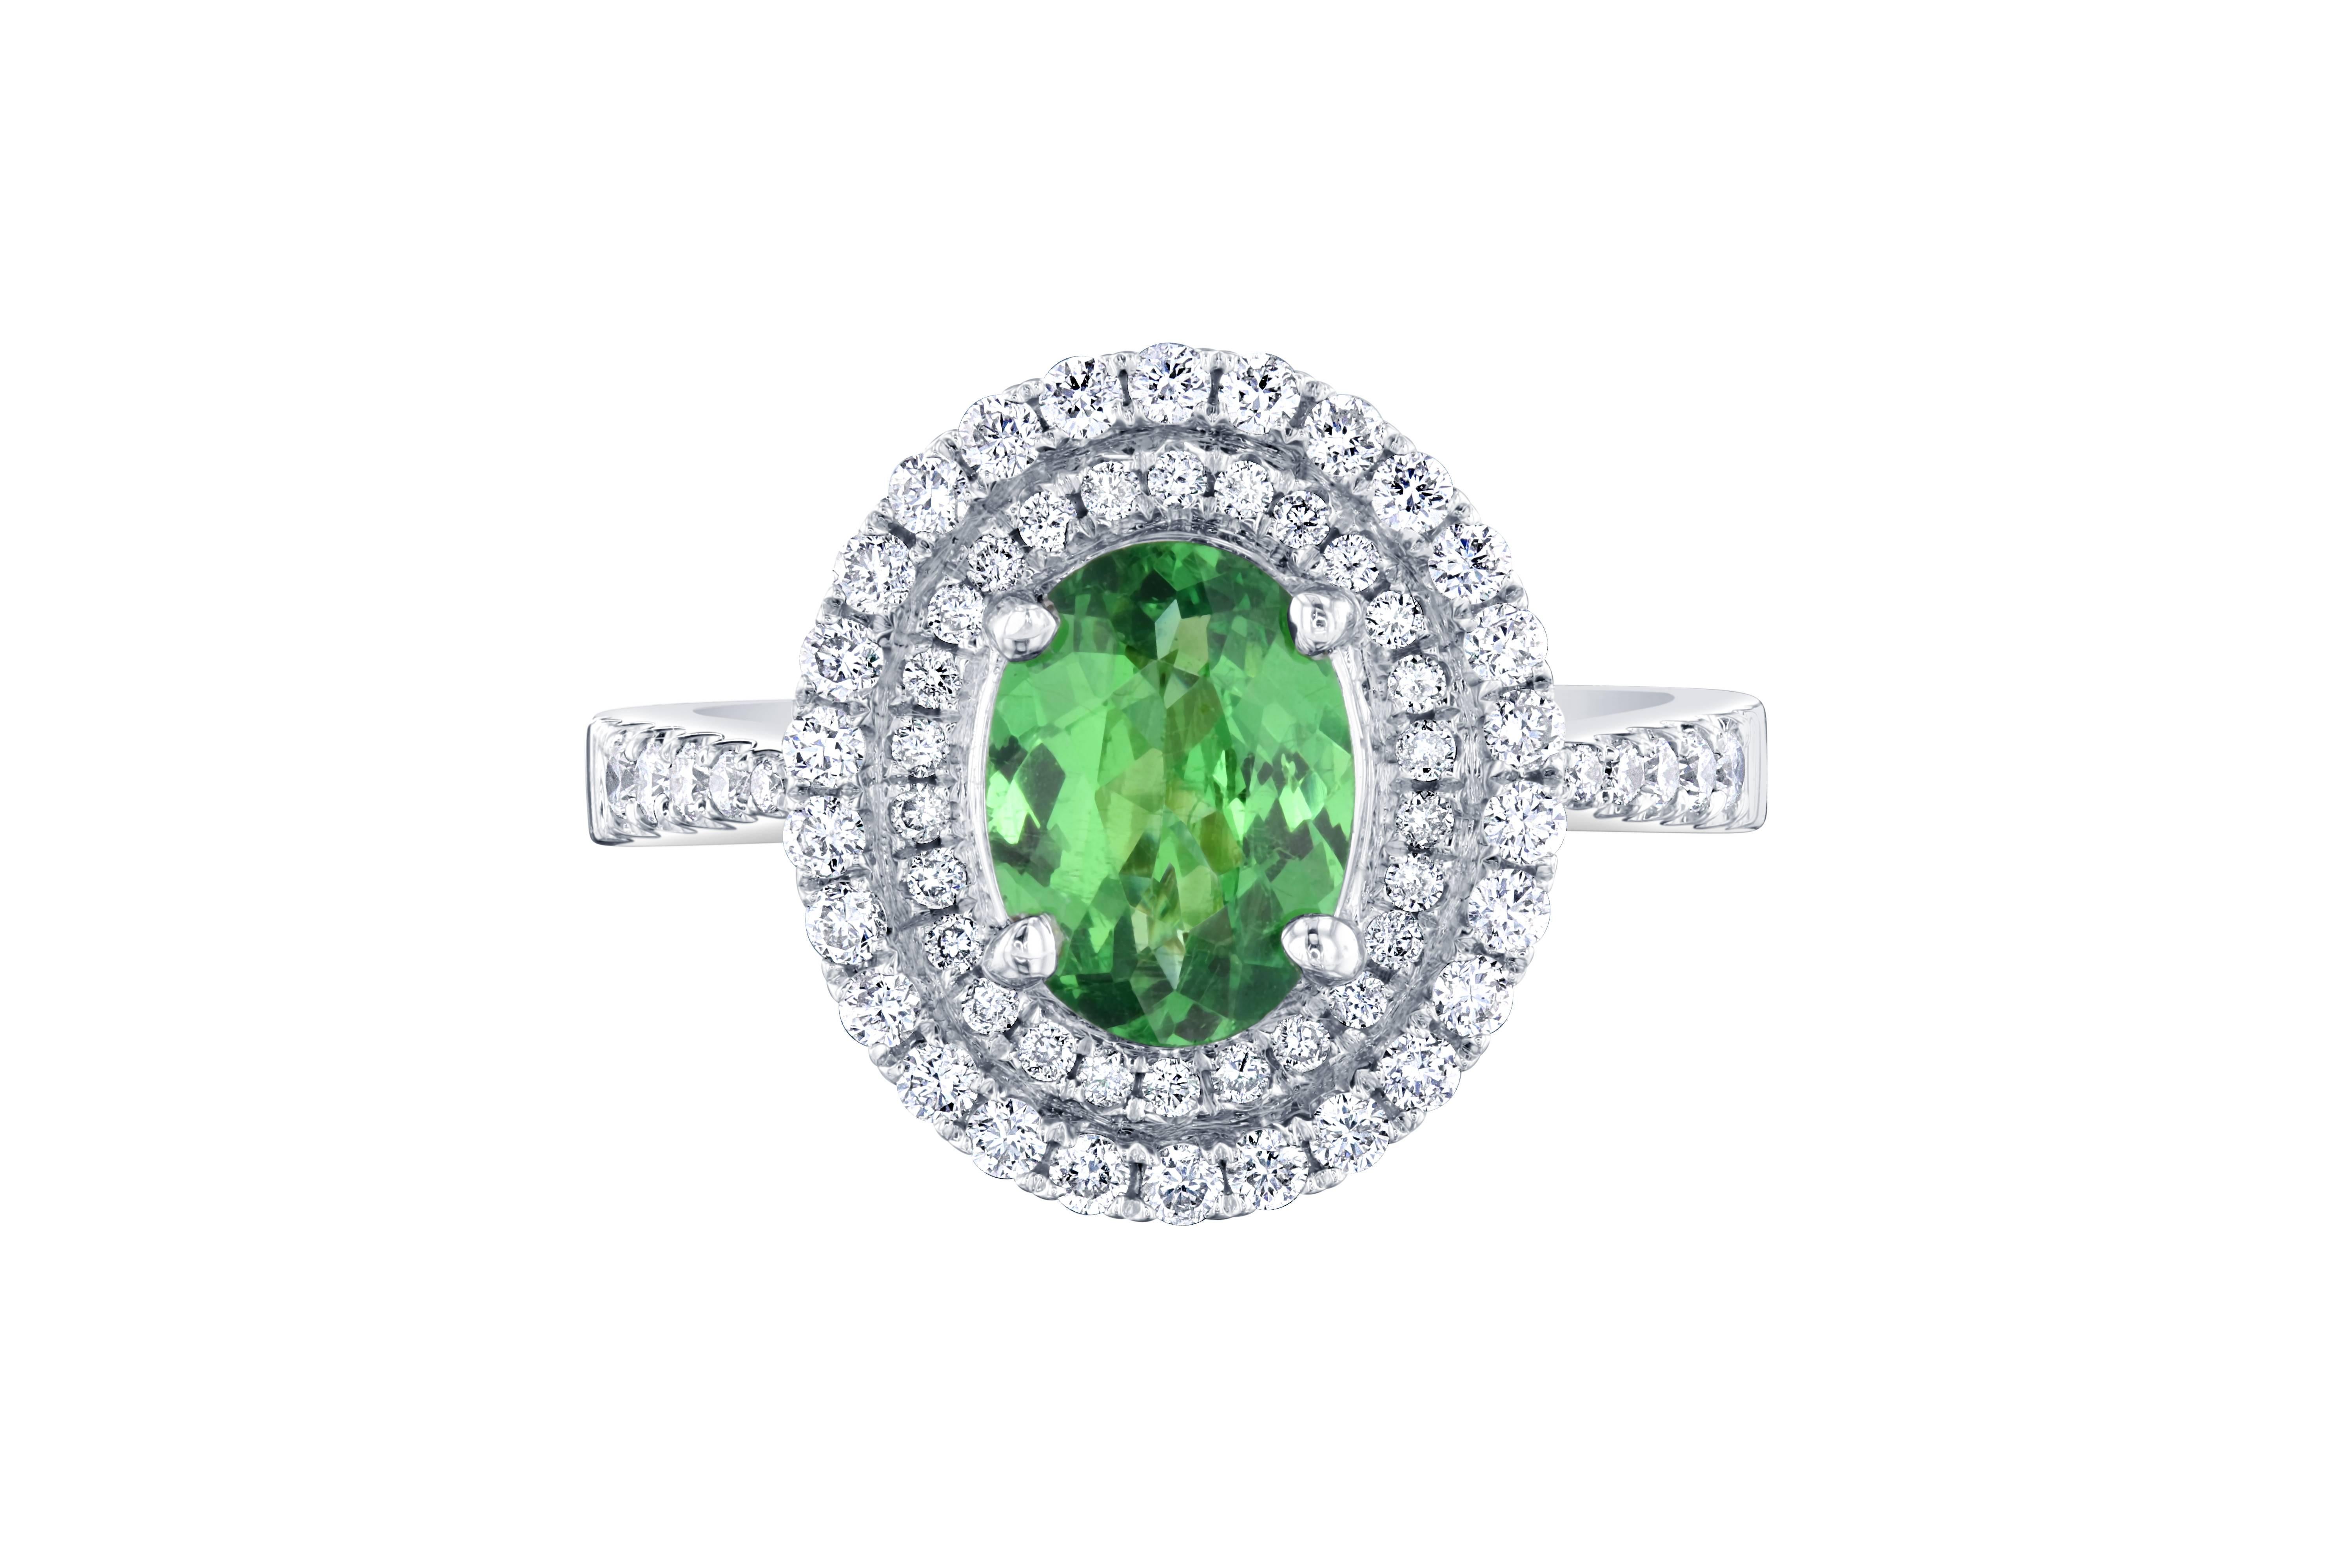 Stunning double halo setting with an Oval cut Tsavorite.   This ring has an Oval cut Tsavorite in the center of the ring which weighs 1.36 carats and is surrounded by a double halo of 62 Round Cut Diamonds that weigh 0.54 carat.  The total weight of